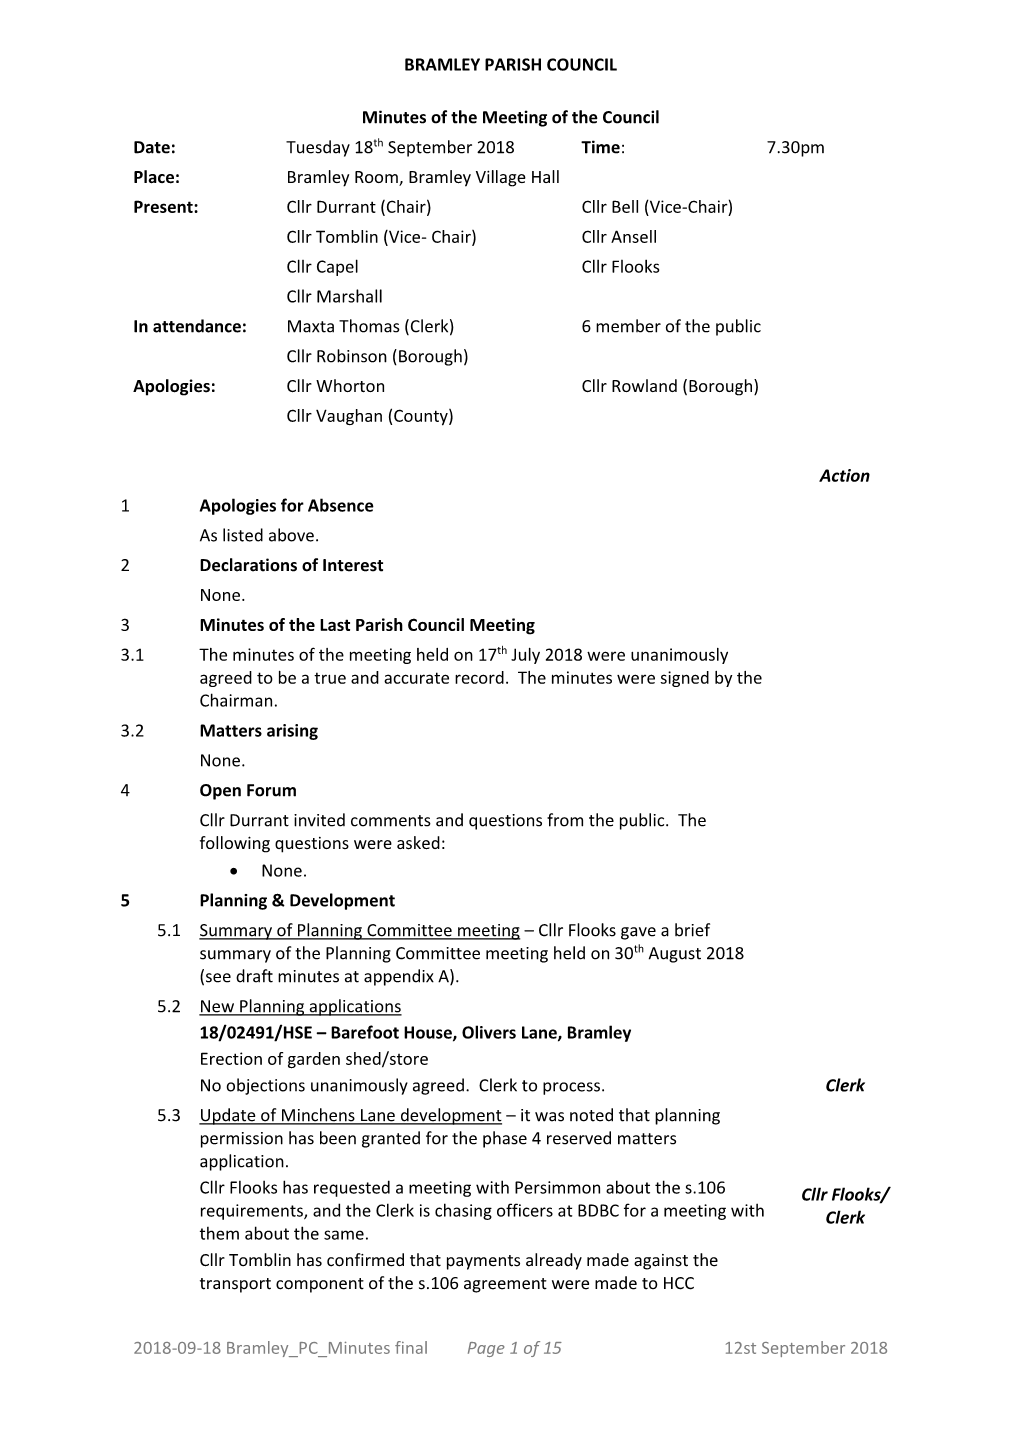 2018-09-18 Bramley PC Minutes Final Page 1 of 15 12St September 2018